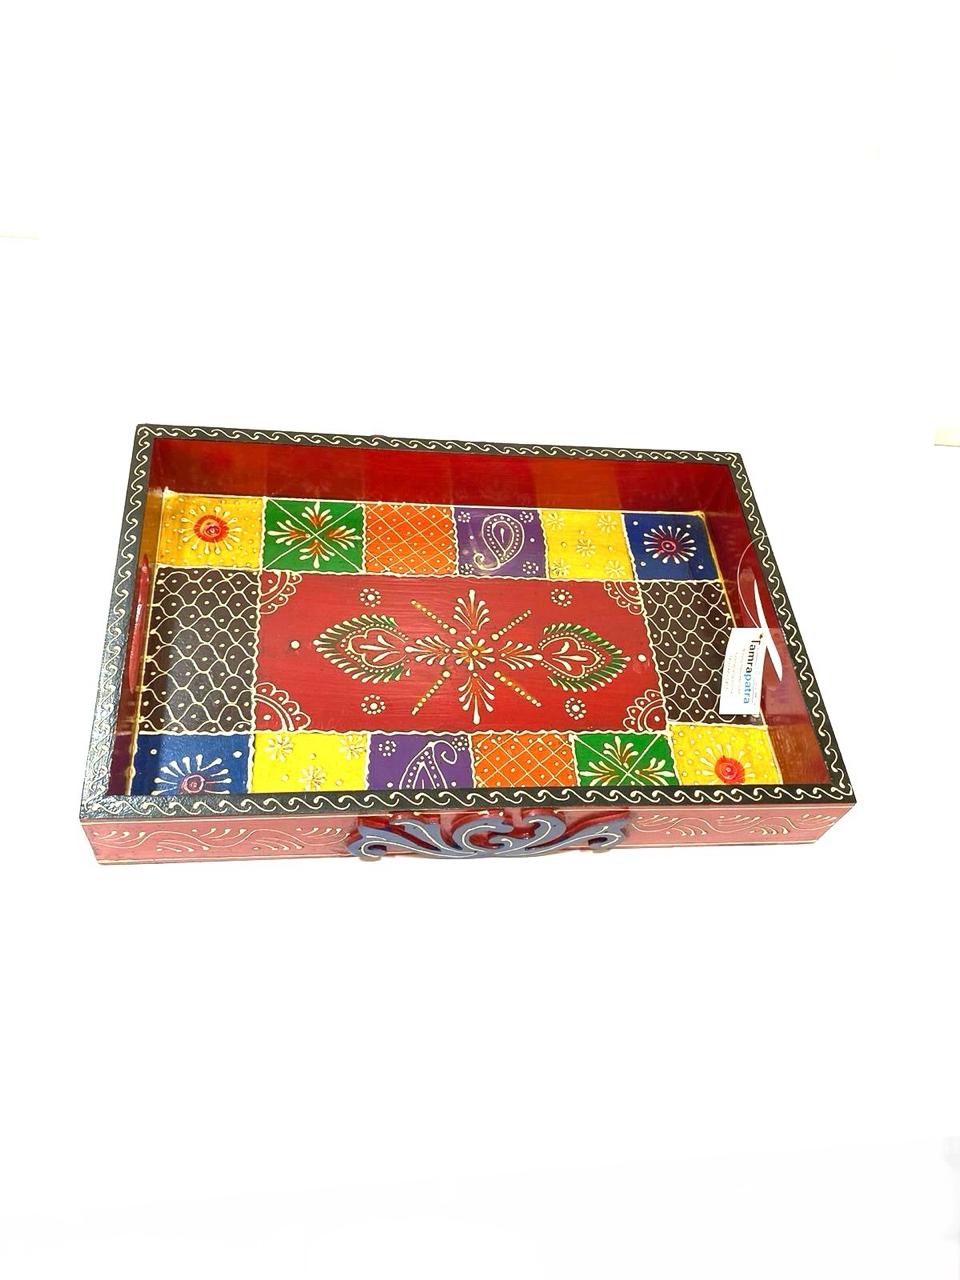 Utility Trays By Indian Artisans HandPainted Traditional By Tamrapatra - Tamrapatra